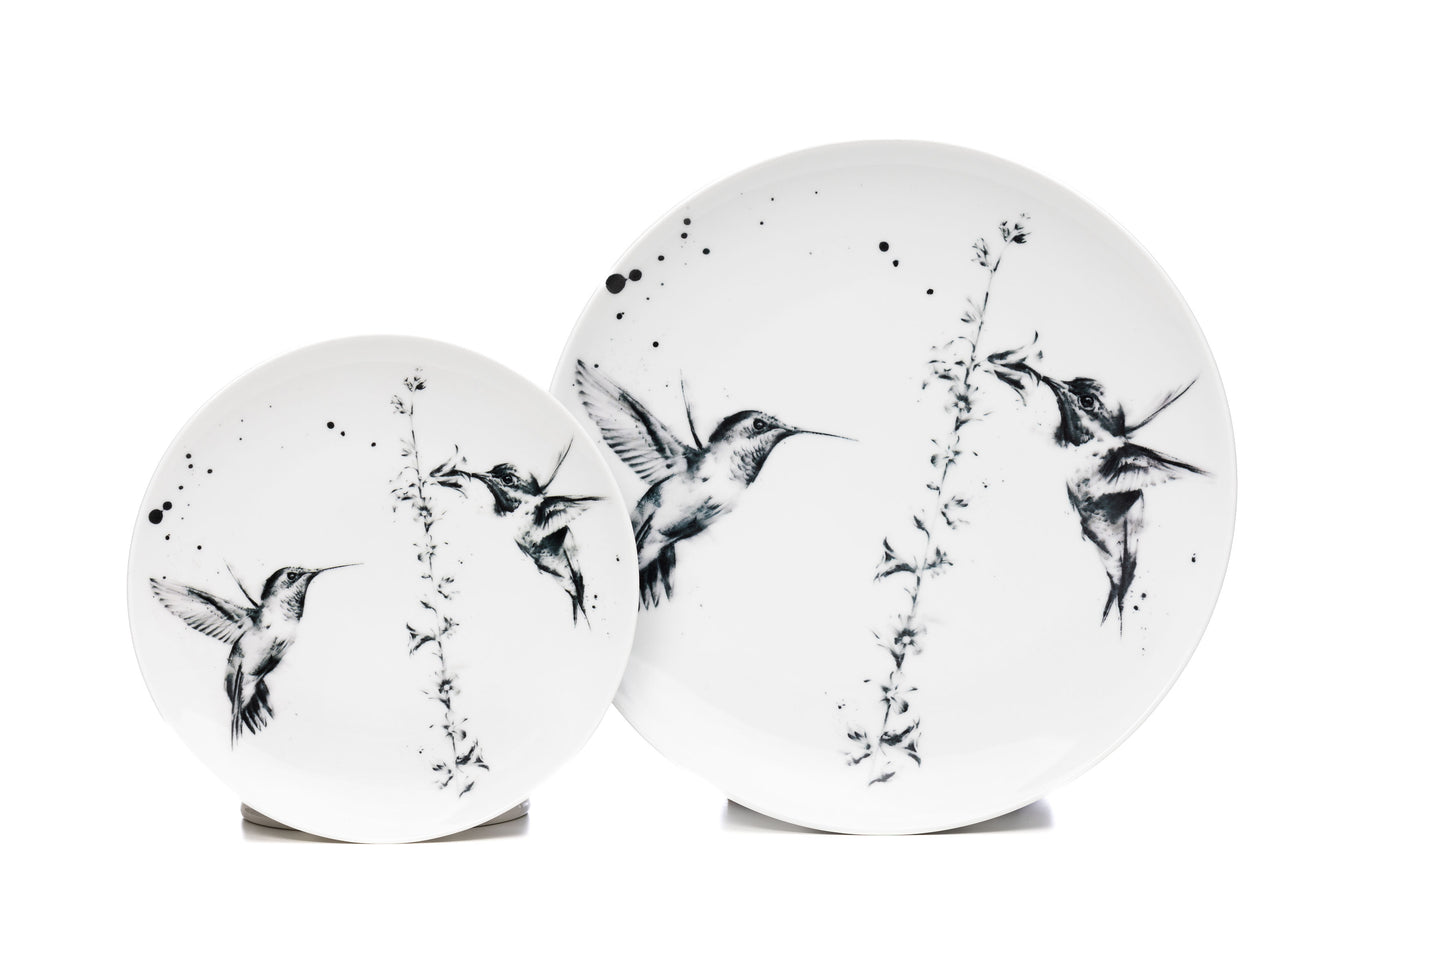 Dinnerware set of 4, 6, 8 containing one white porcelain dinner plate, and one salad plate each with 2 hummingbirds around a flower illustration and black ink splatter dishwasher safe product photo on white background